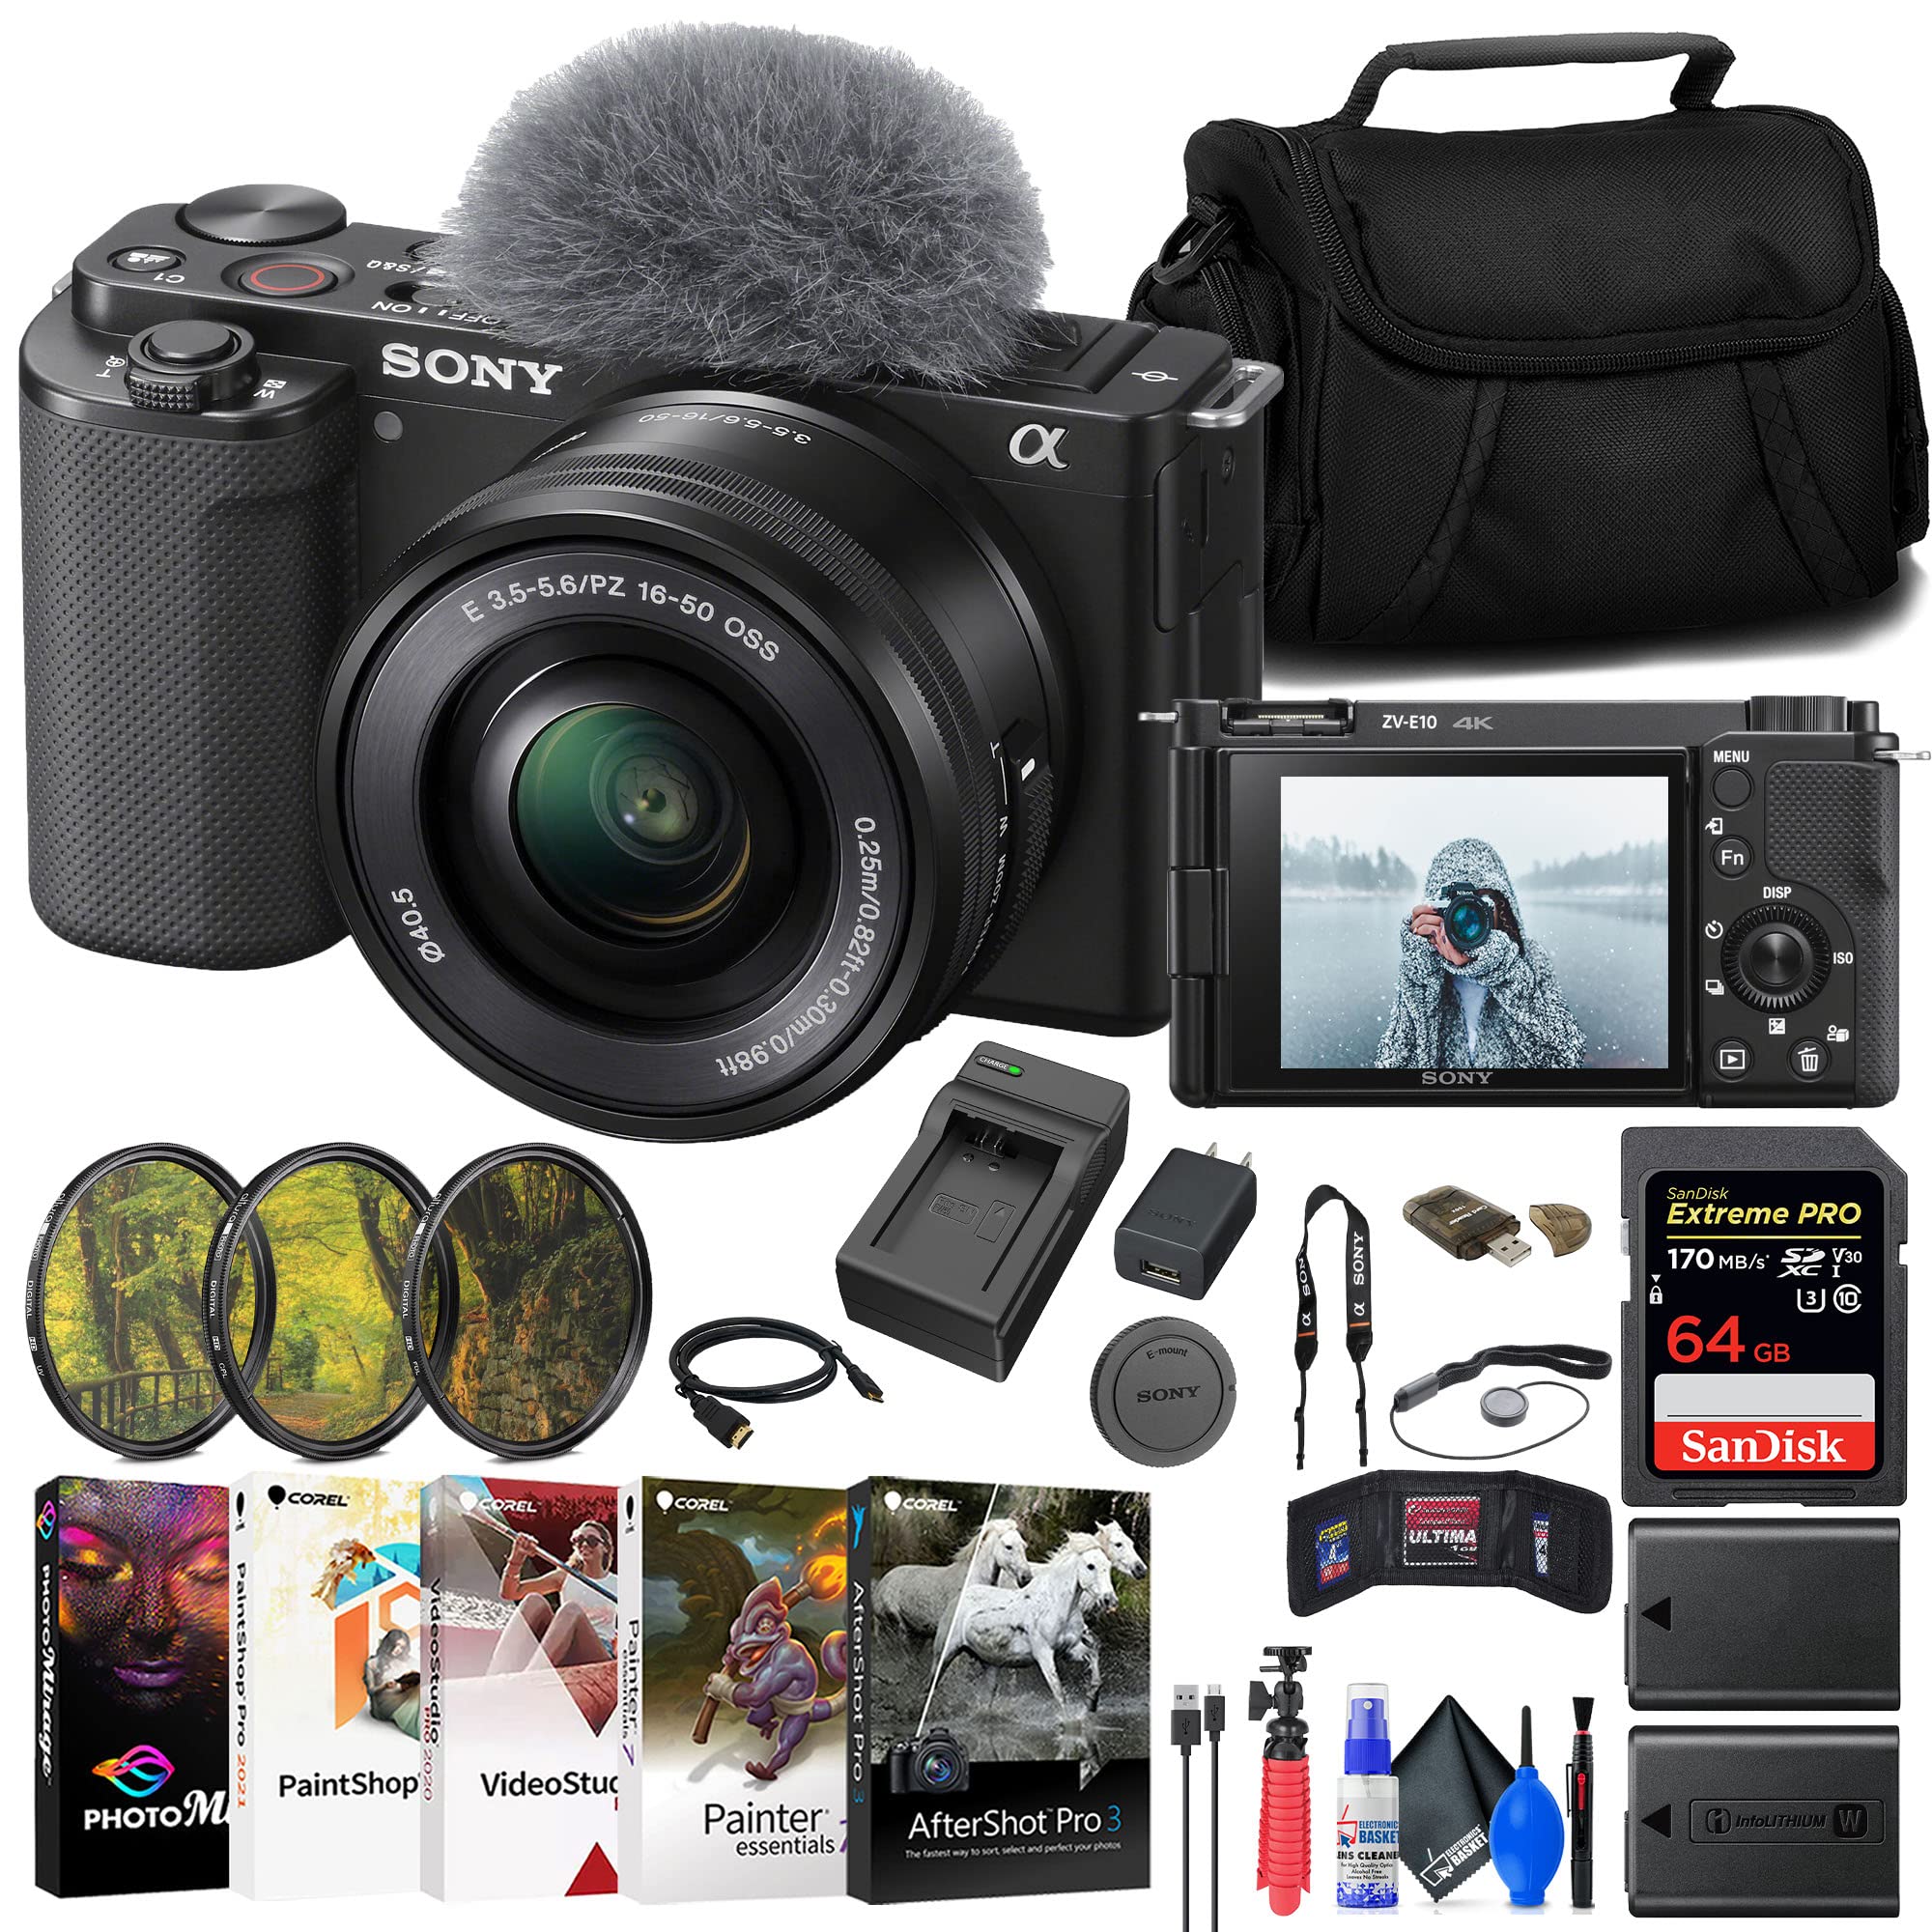 Sony ZV-E10 Mirrorless Camera with 16-50mm Lens (Black) (ILCZV-E10L/B) + 64GB Memory Card + Filter Kit + Charger + NPF-W50 Battery + Card Reader + Corel Photo Software + HDMI Cable + More (Renewed)